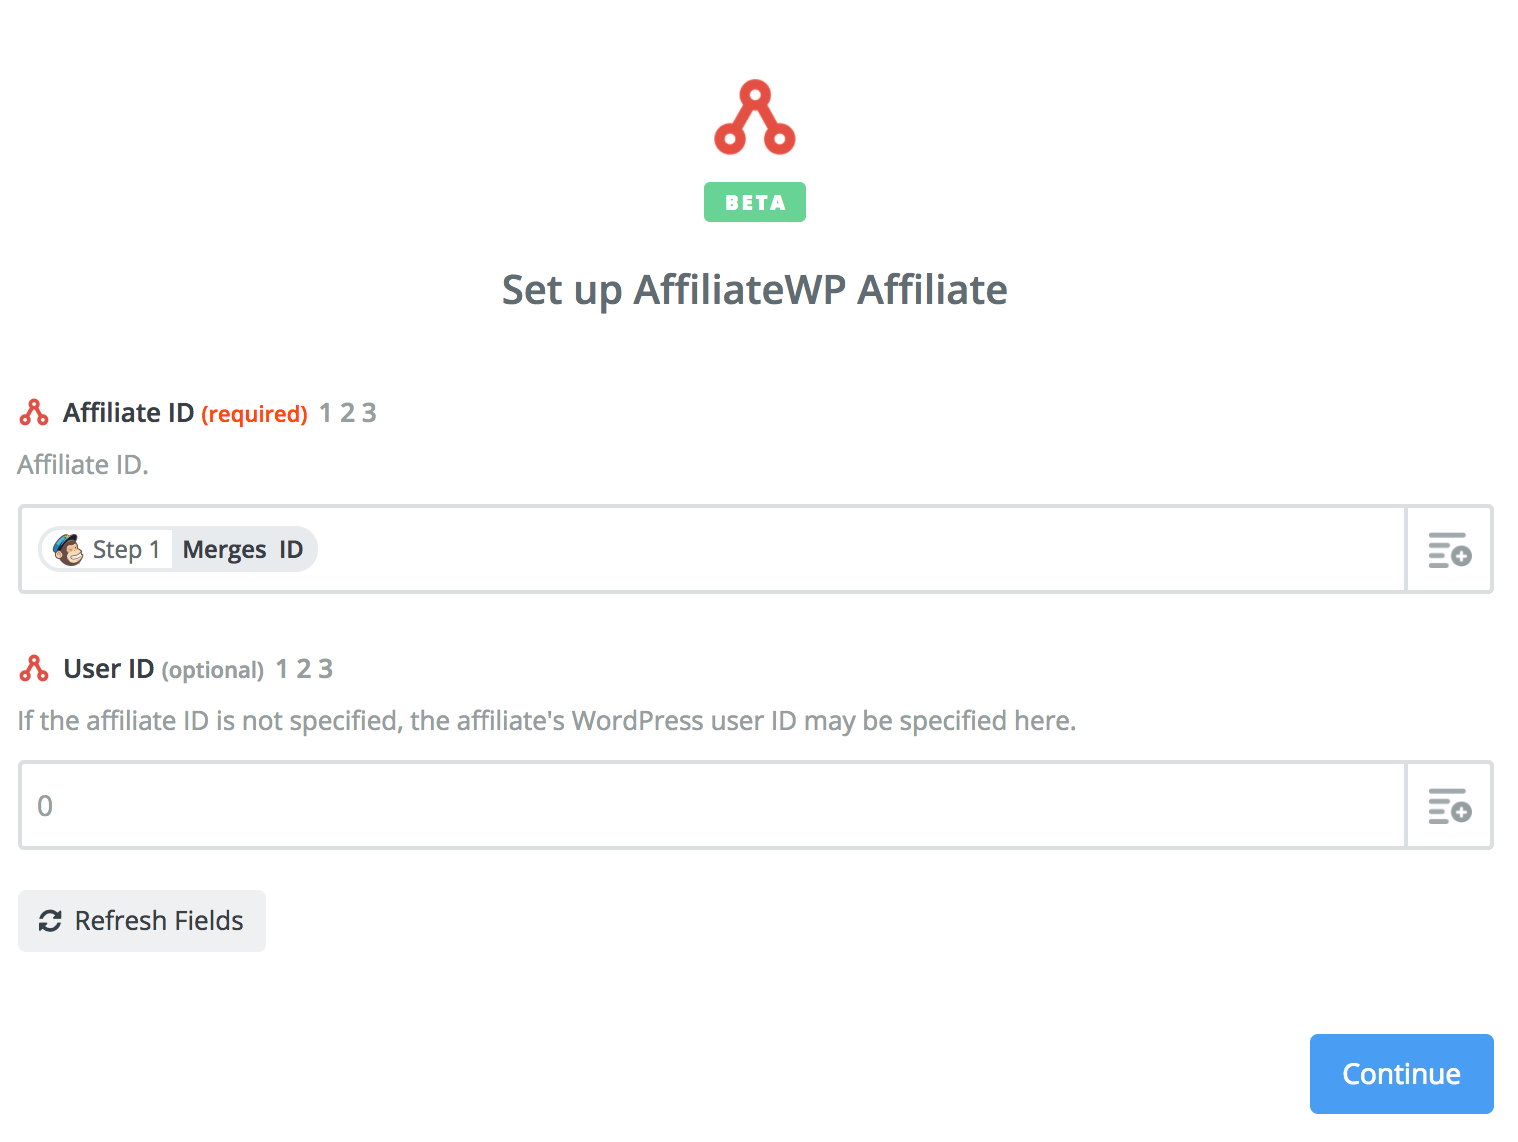 Mapping the ID created in Mailchimp to AffiliateWP